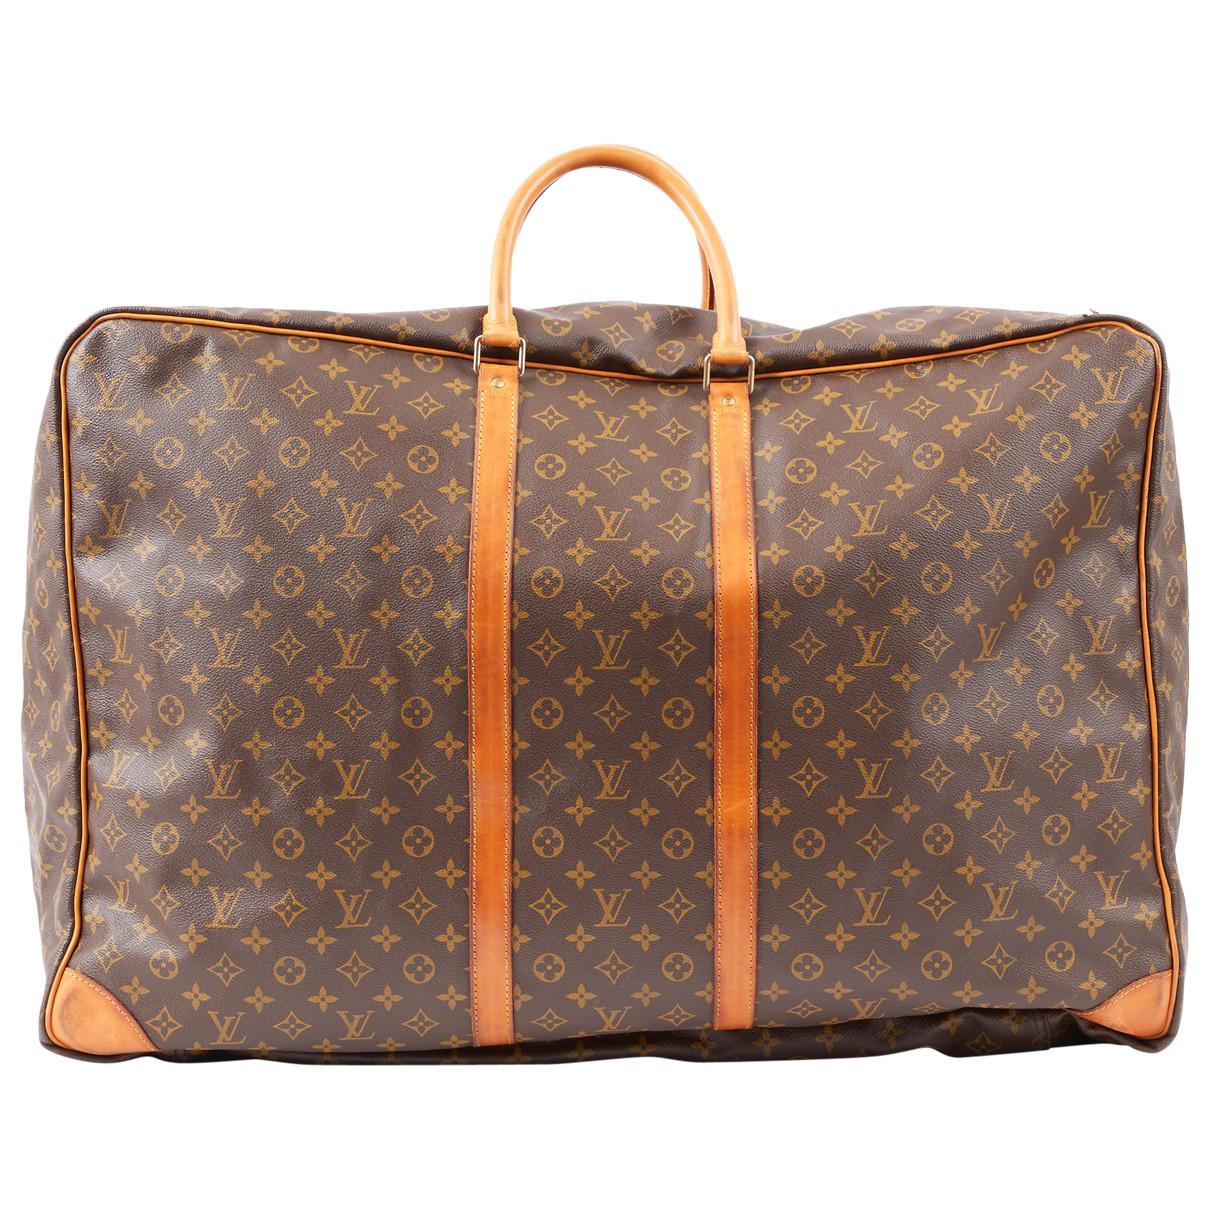 Louis Vuitton Leather Travel Bag in Brown - Lyst